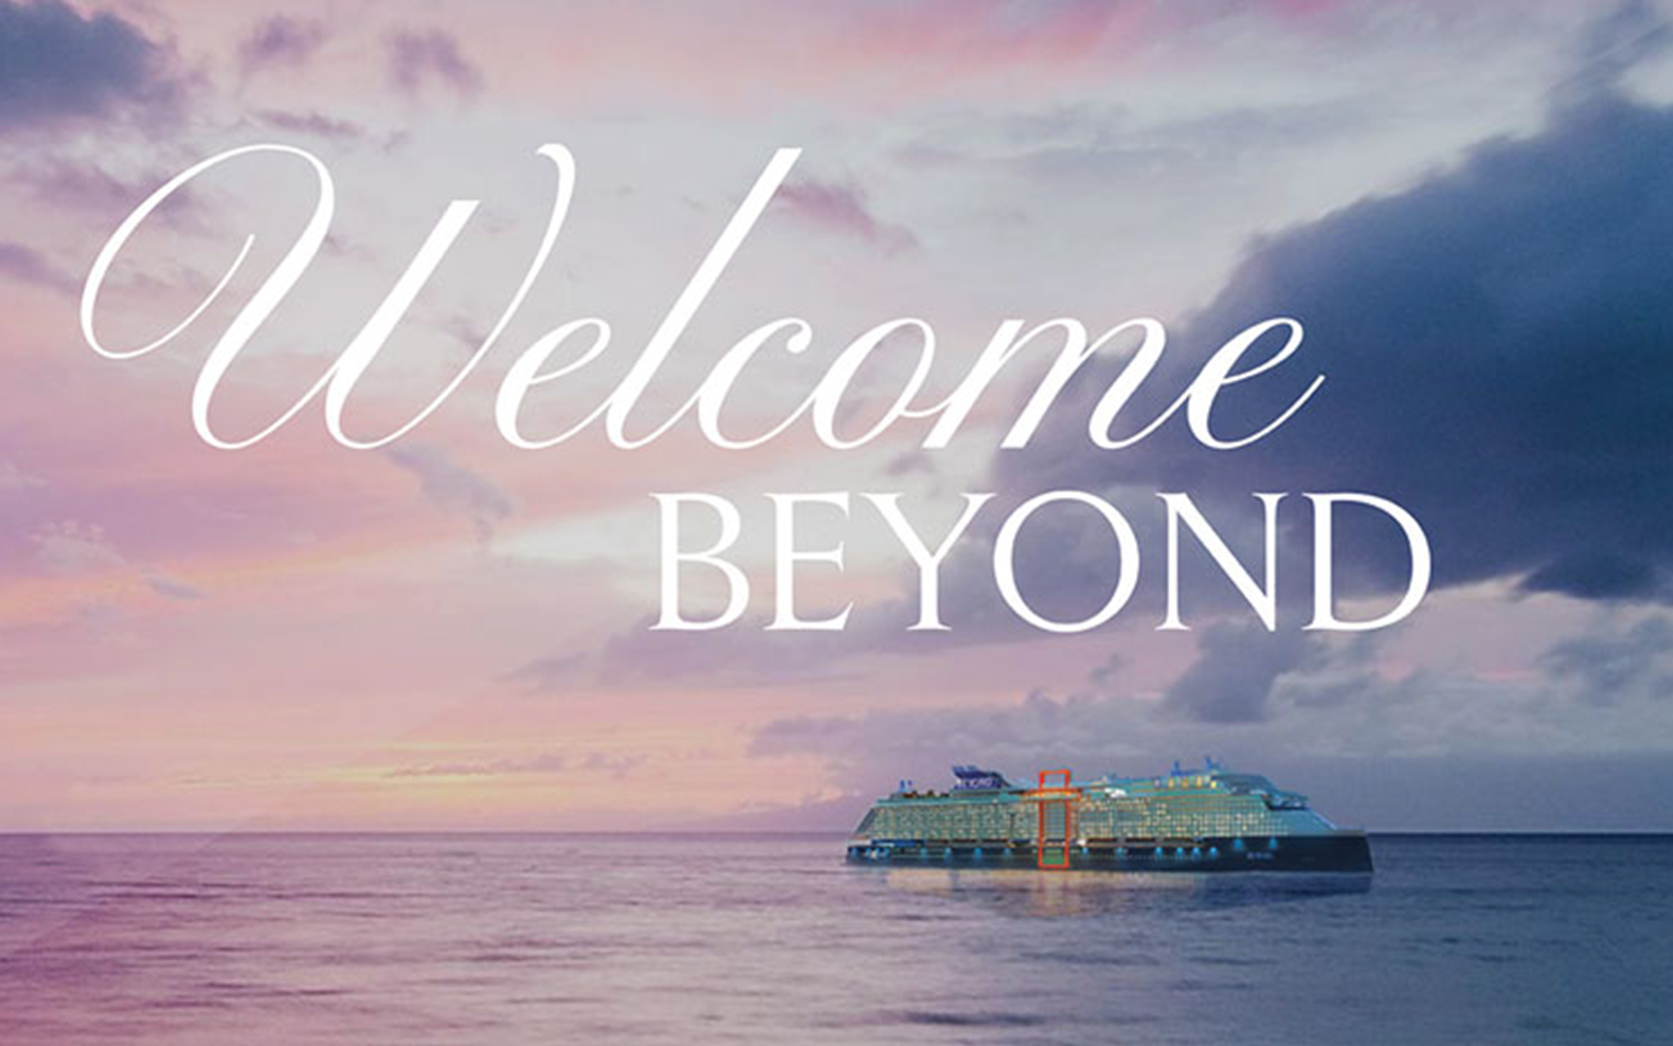 Welcome Beyond! Receive up to $200 Shipboard Credit* for your Next Celebrity Booking